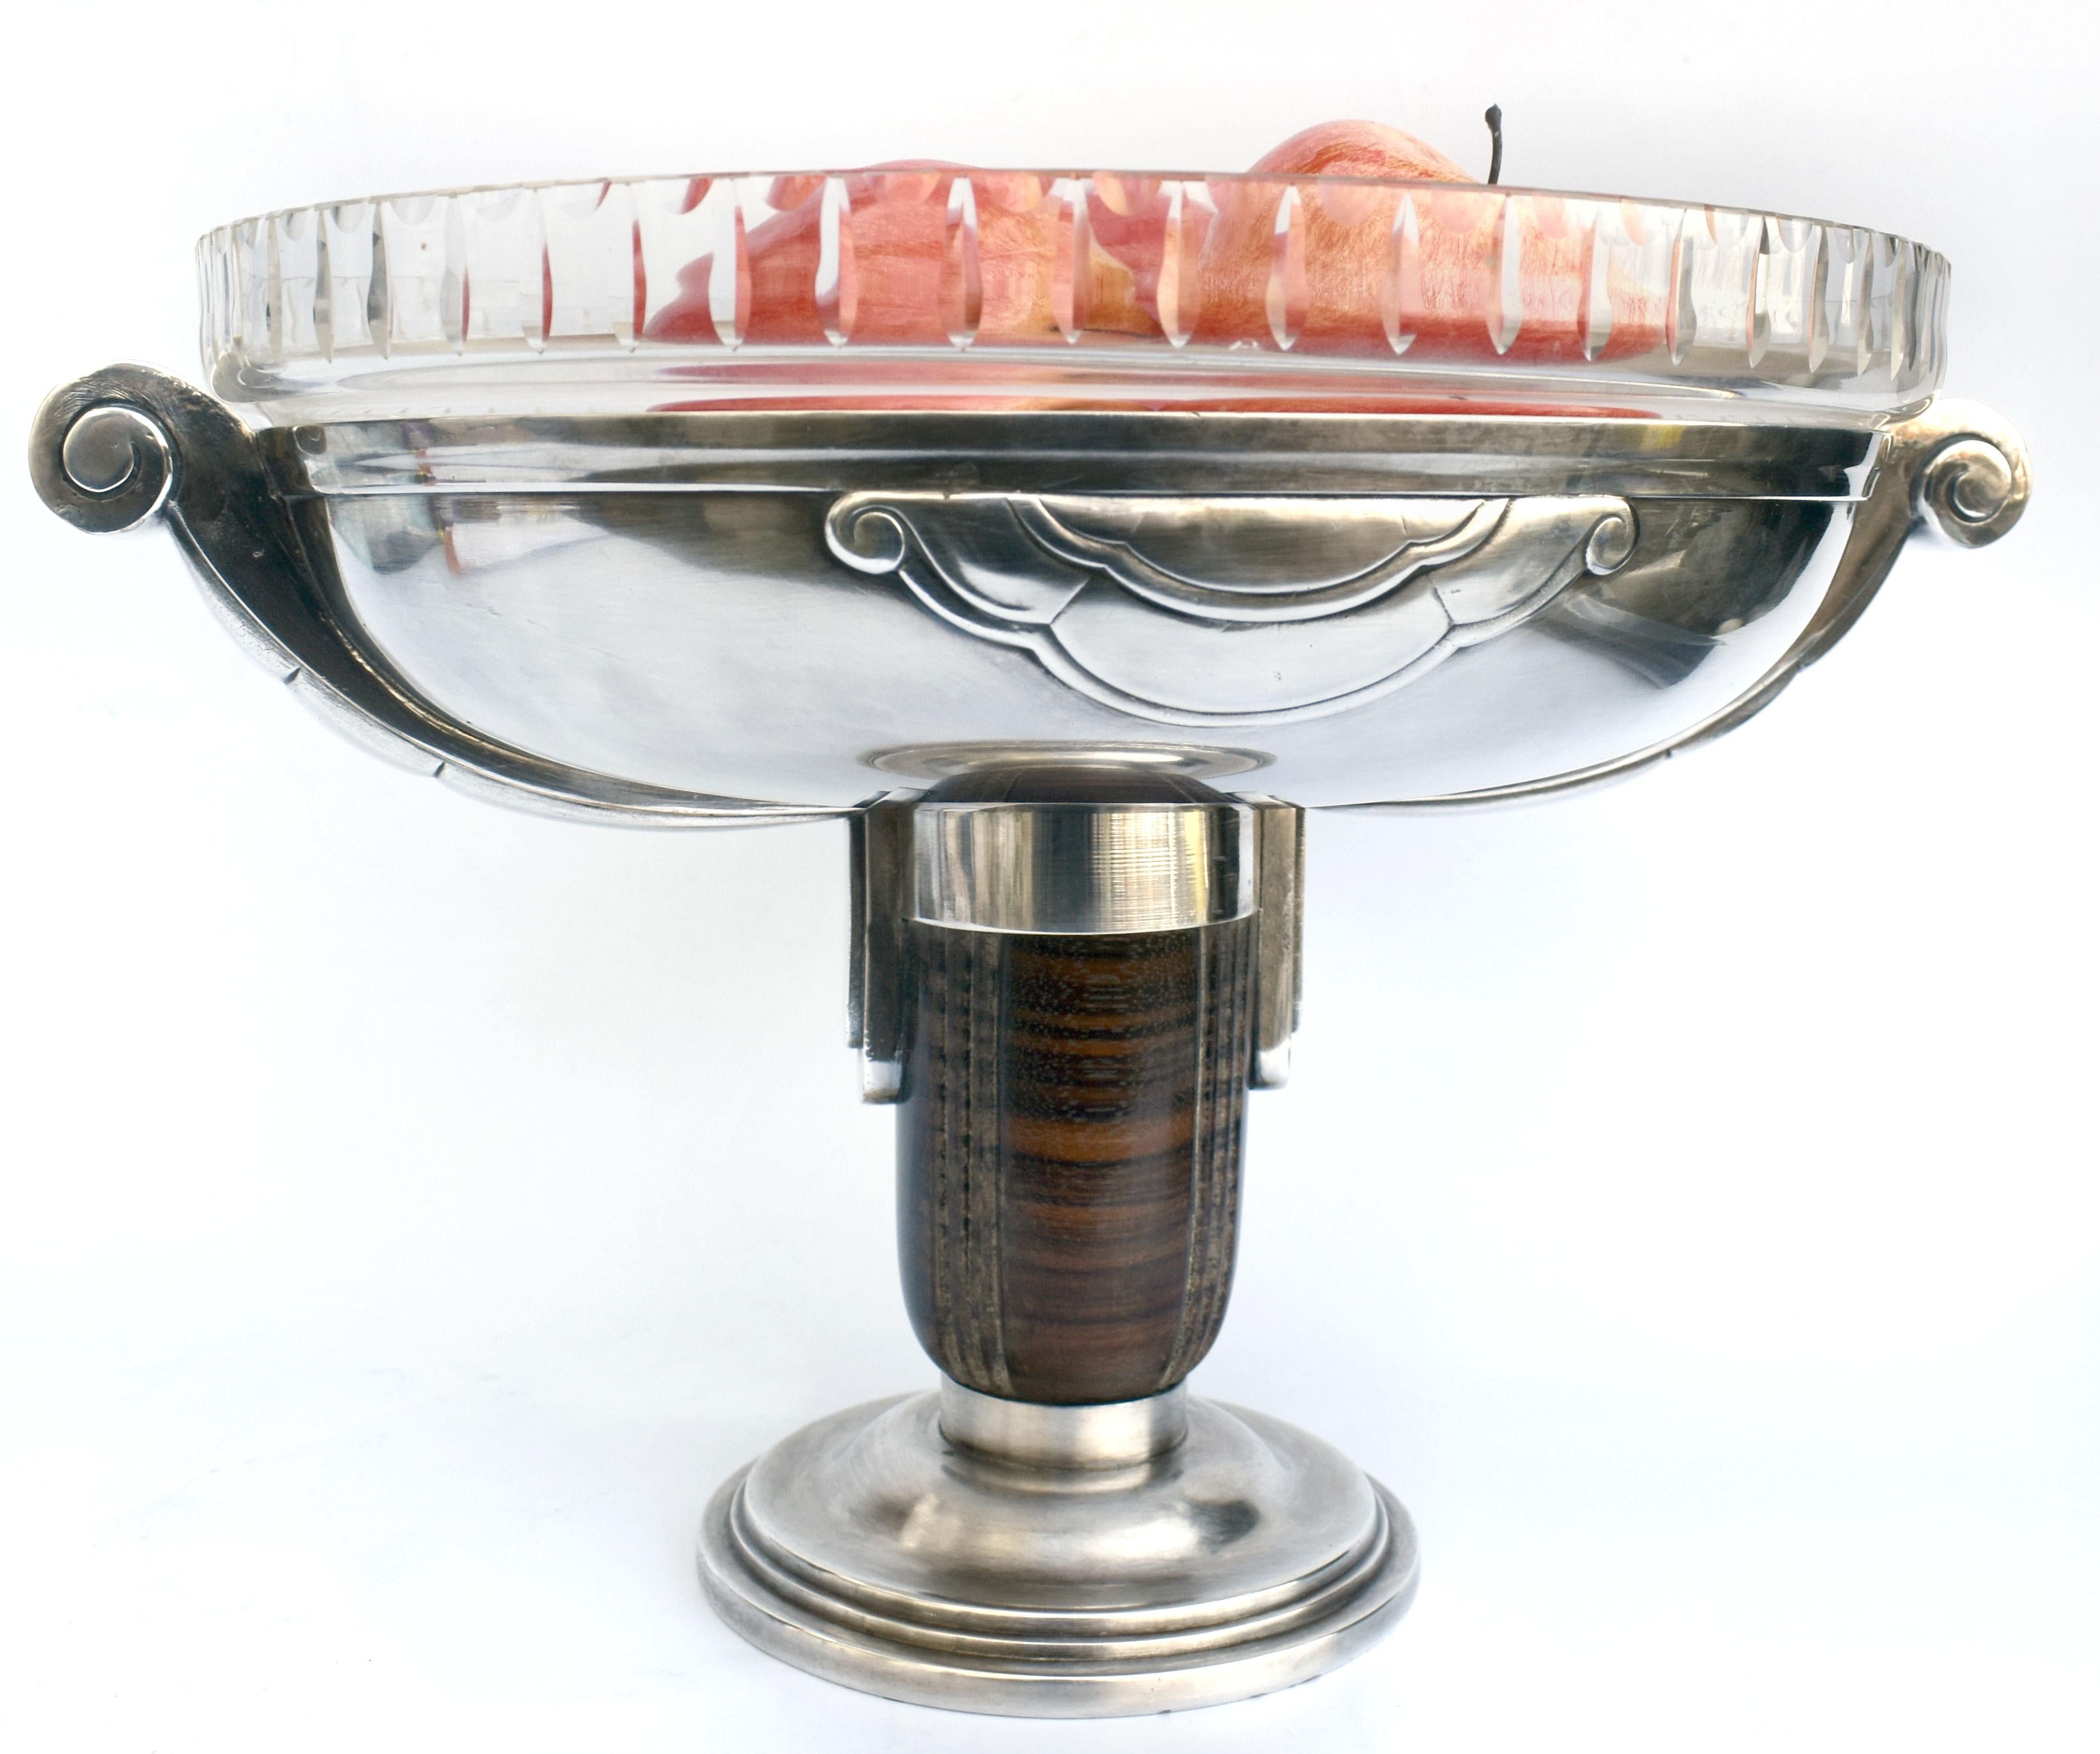 High styled, 1930's Modernist coupe or fruit bowl originating from France with original crystal glass insert. The metal is silver plated with Maccasar ebony wood pedestal. A stylish statement to centre piece any room or table. Stamped to the base.